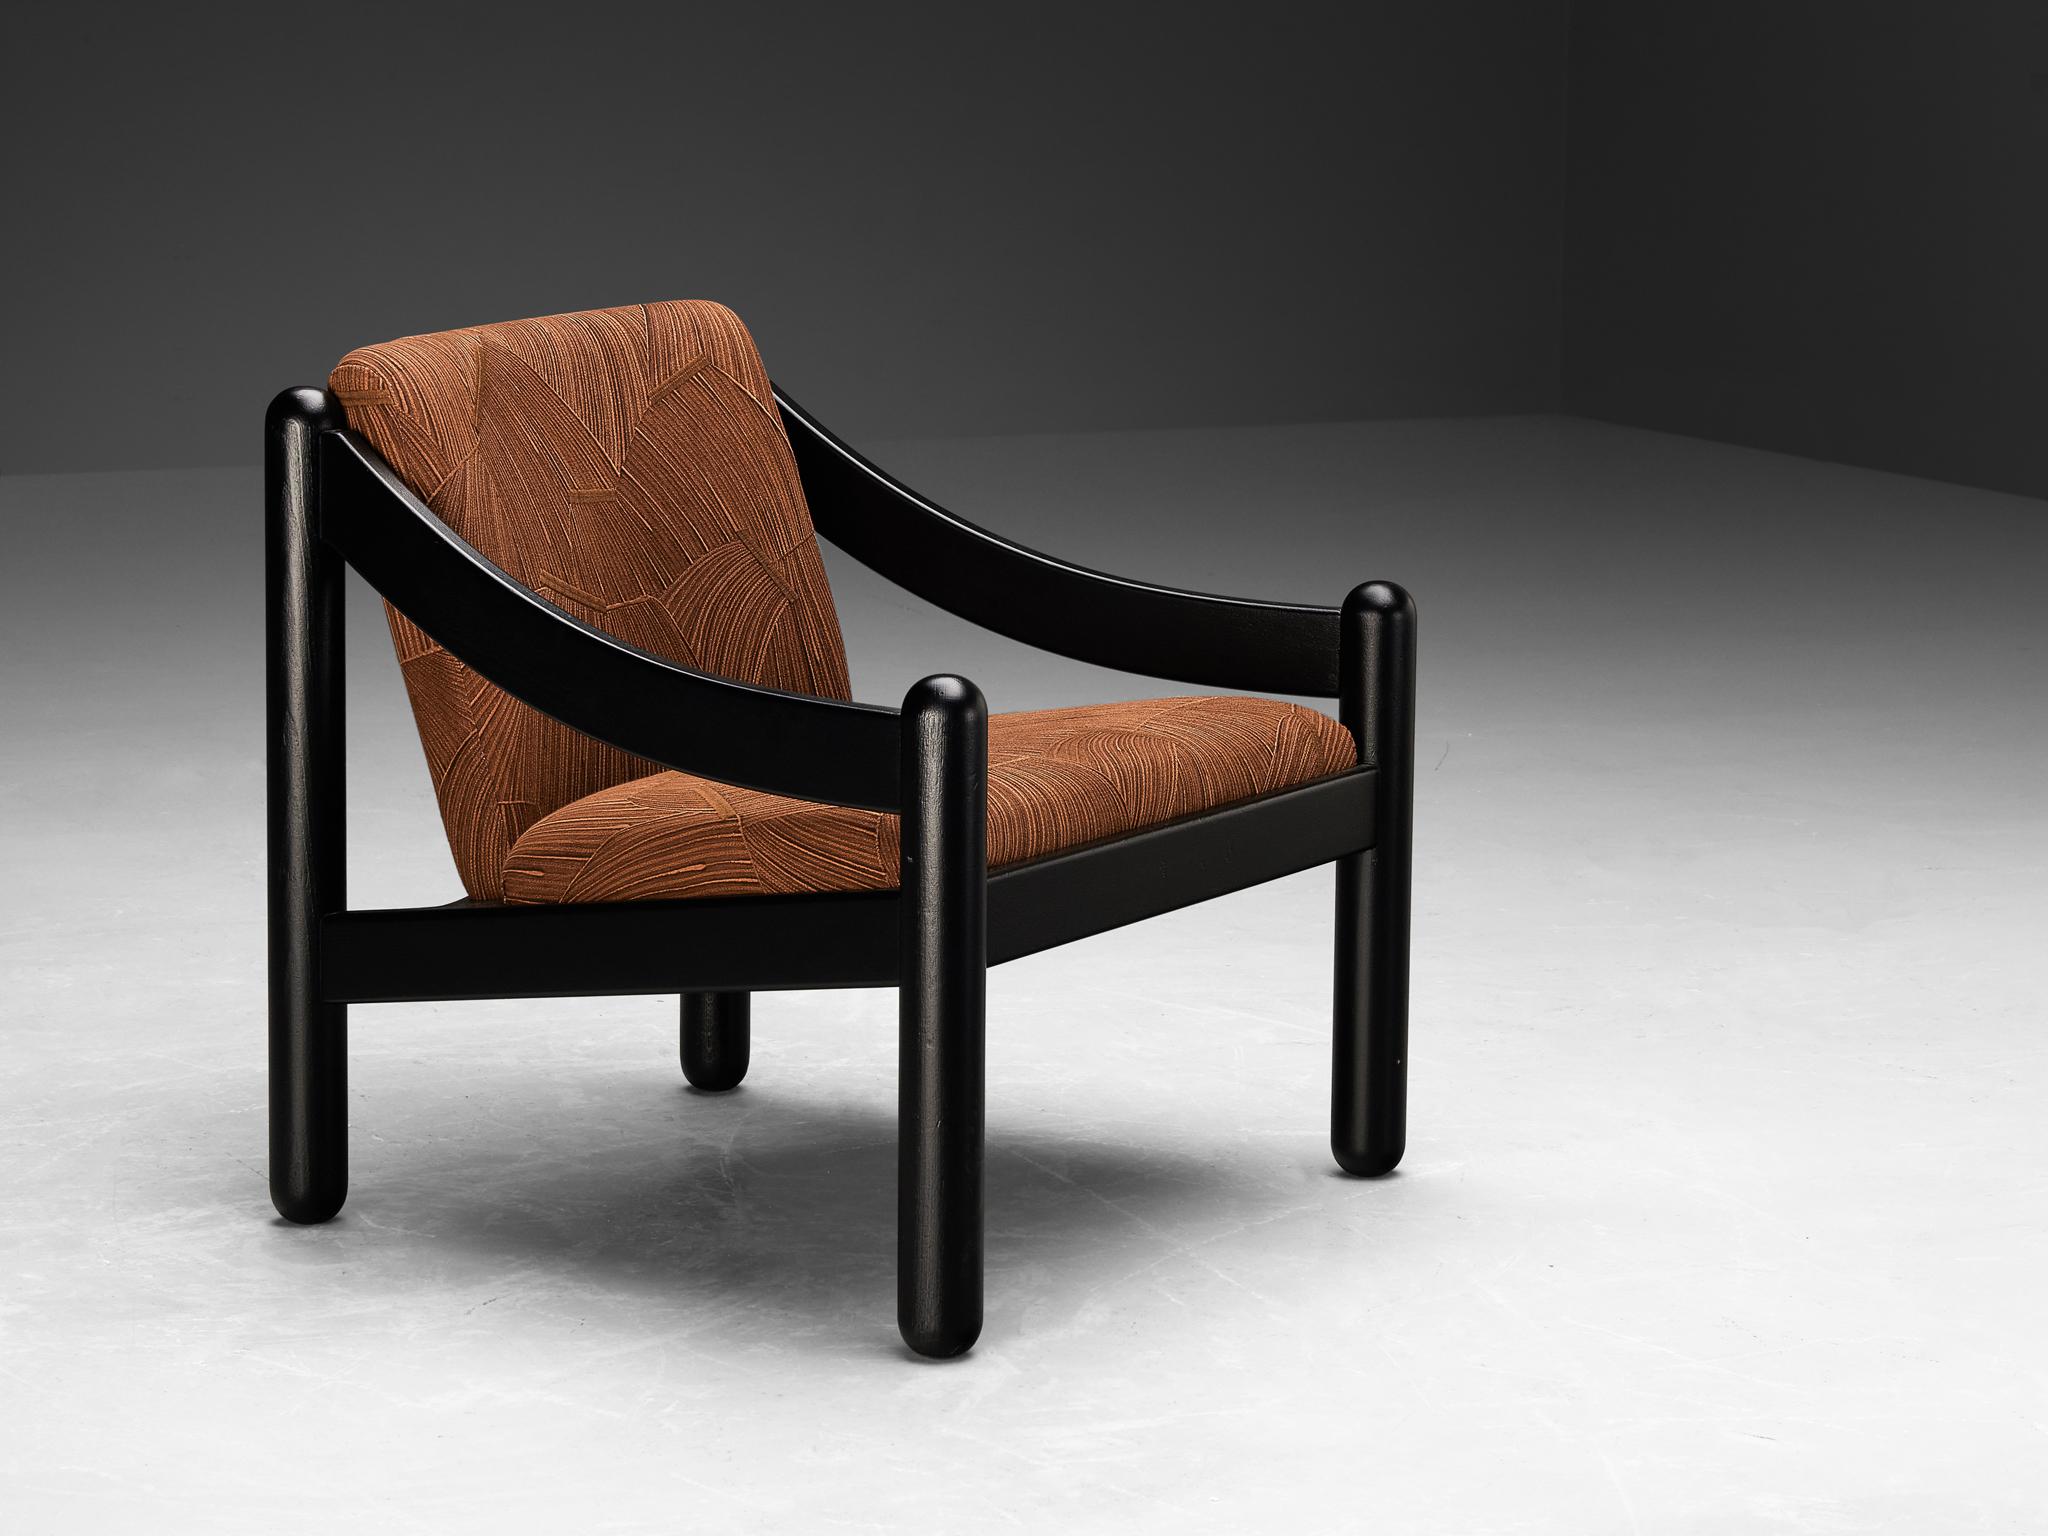 Vico Magistretti for Cassina, ‘Carimate’ lounge chair, lacquered beech, Larsen fabric, Italy, design 1963

The ‘Carimate’ lounge chair is one of Vico Magistretti’s most famous chairs. Originally, the chair had a red color and was designed for the